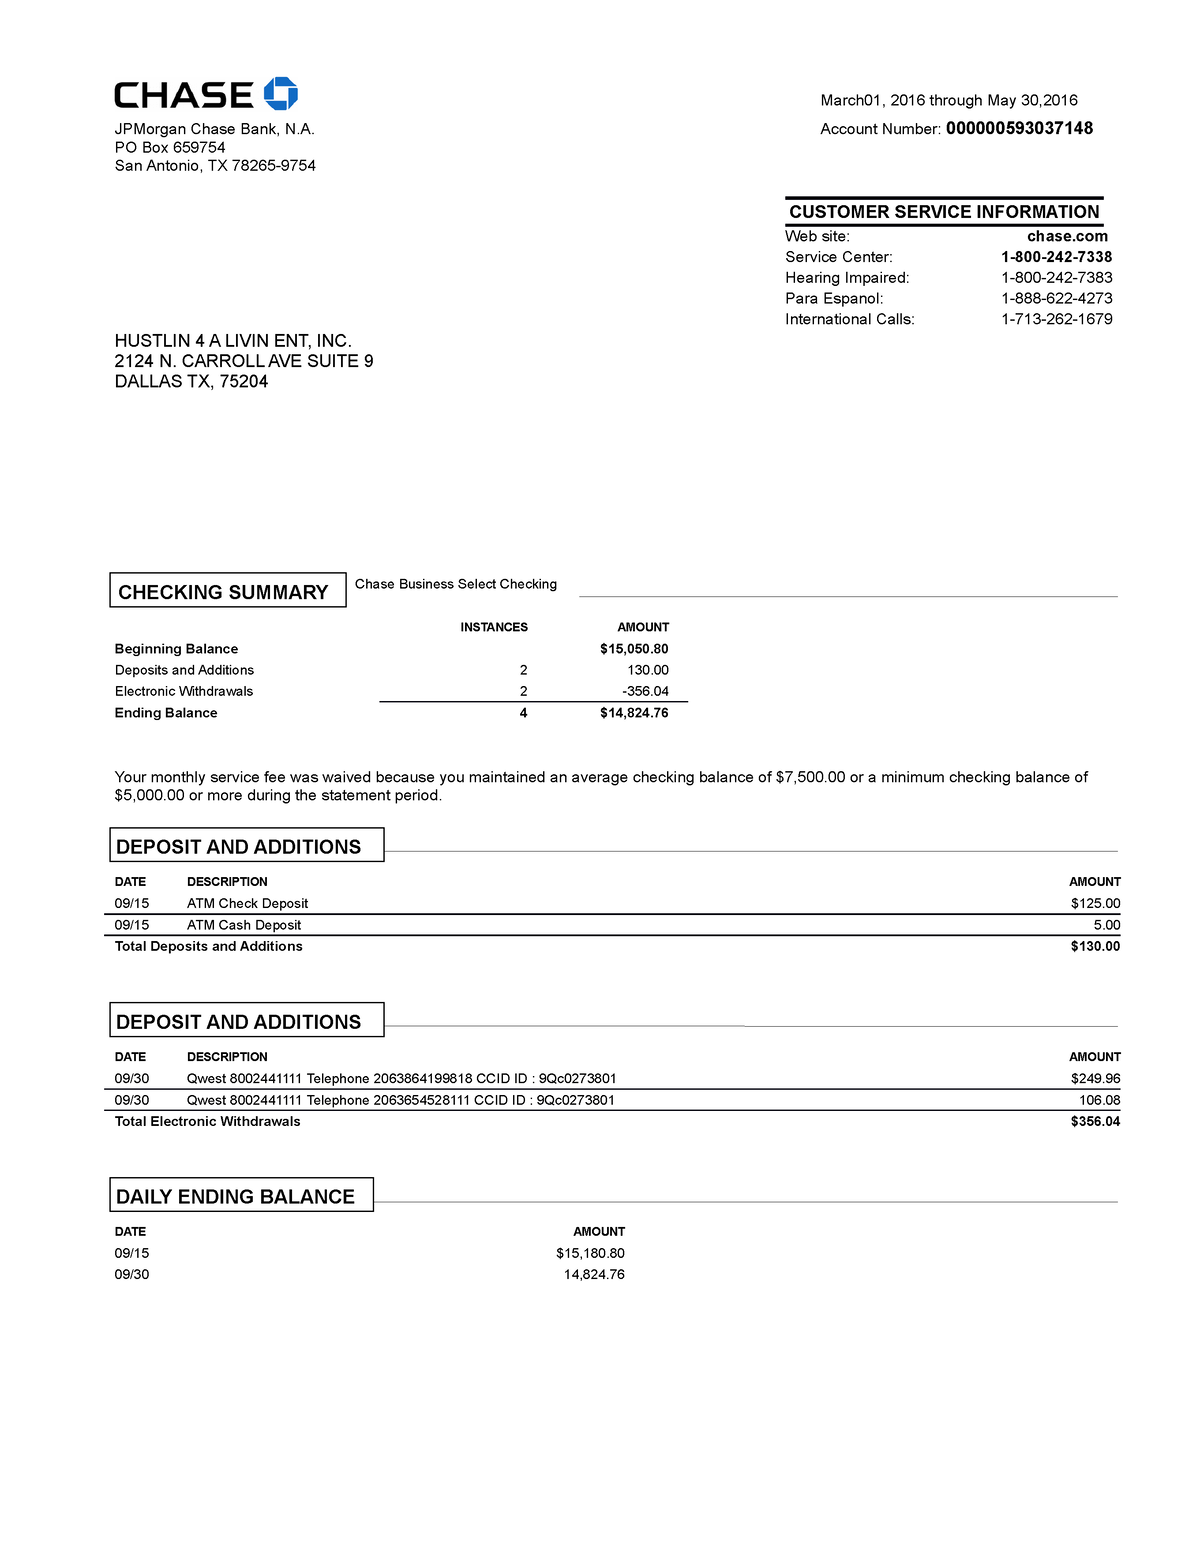 chase-bank-statement-template-lab-march01-2016-through-may-30